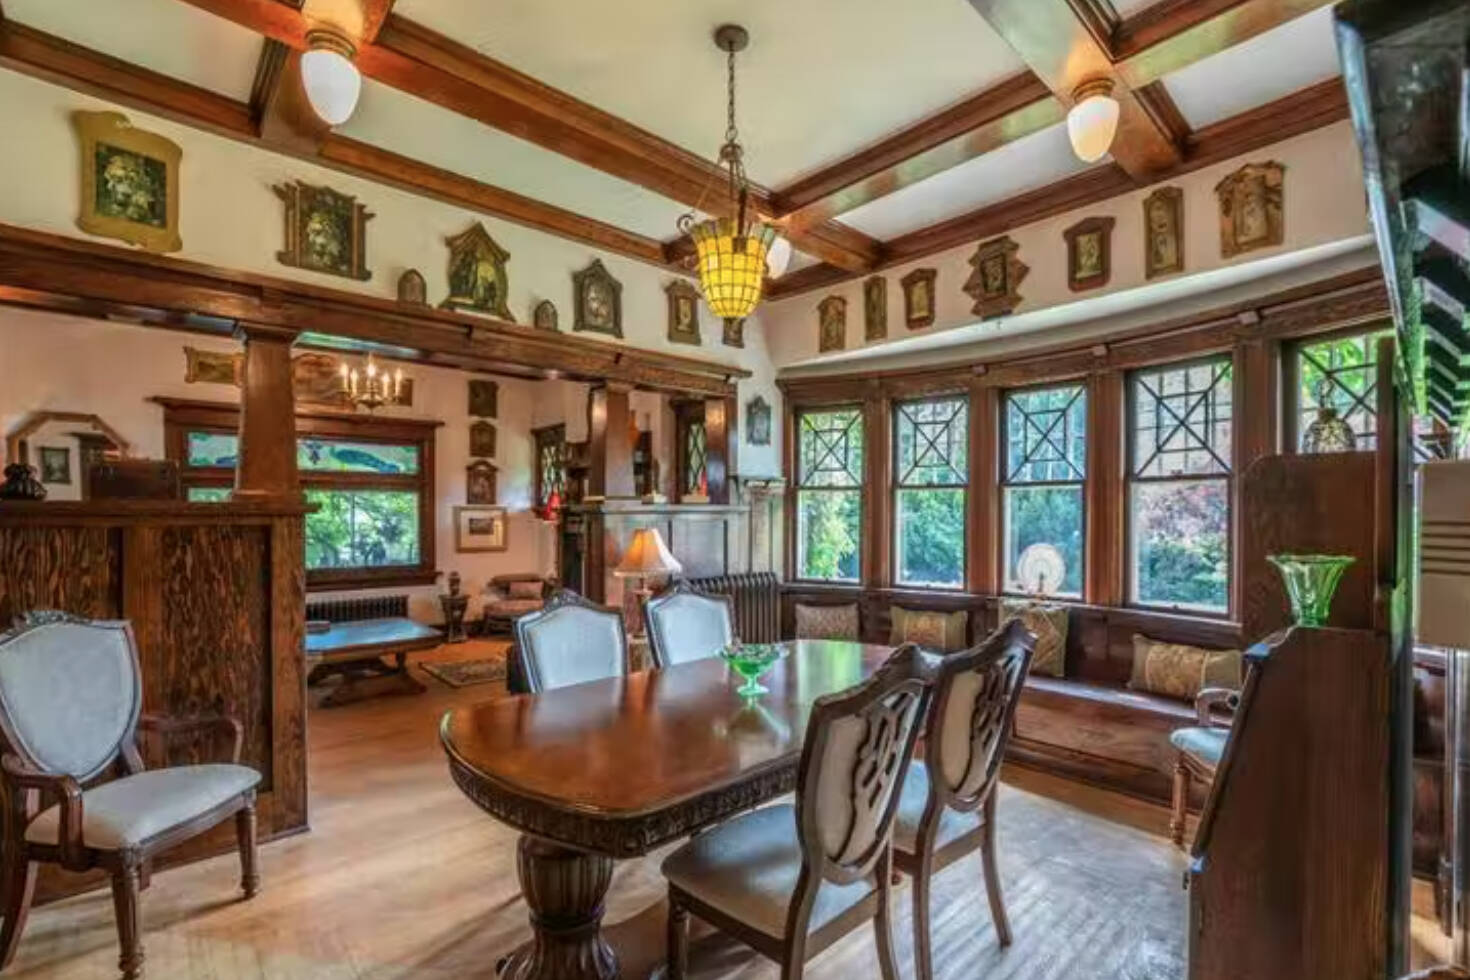 This is the dining room area of the Riordan House up for sale. (Remax photo)